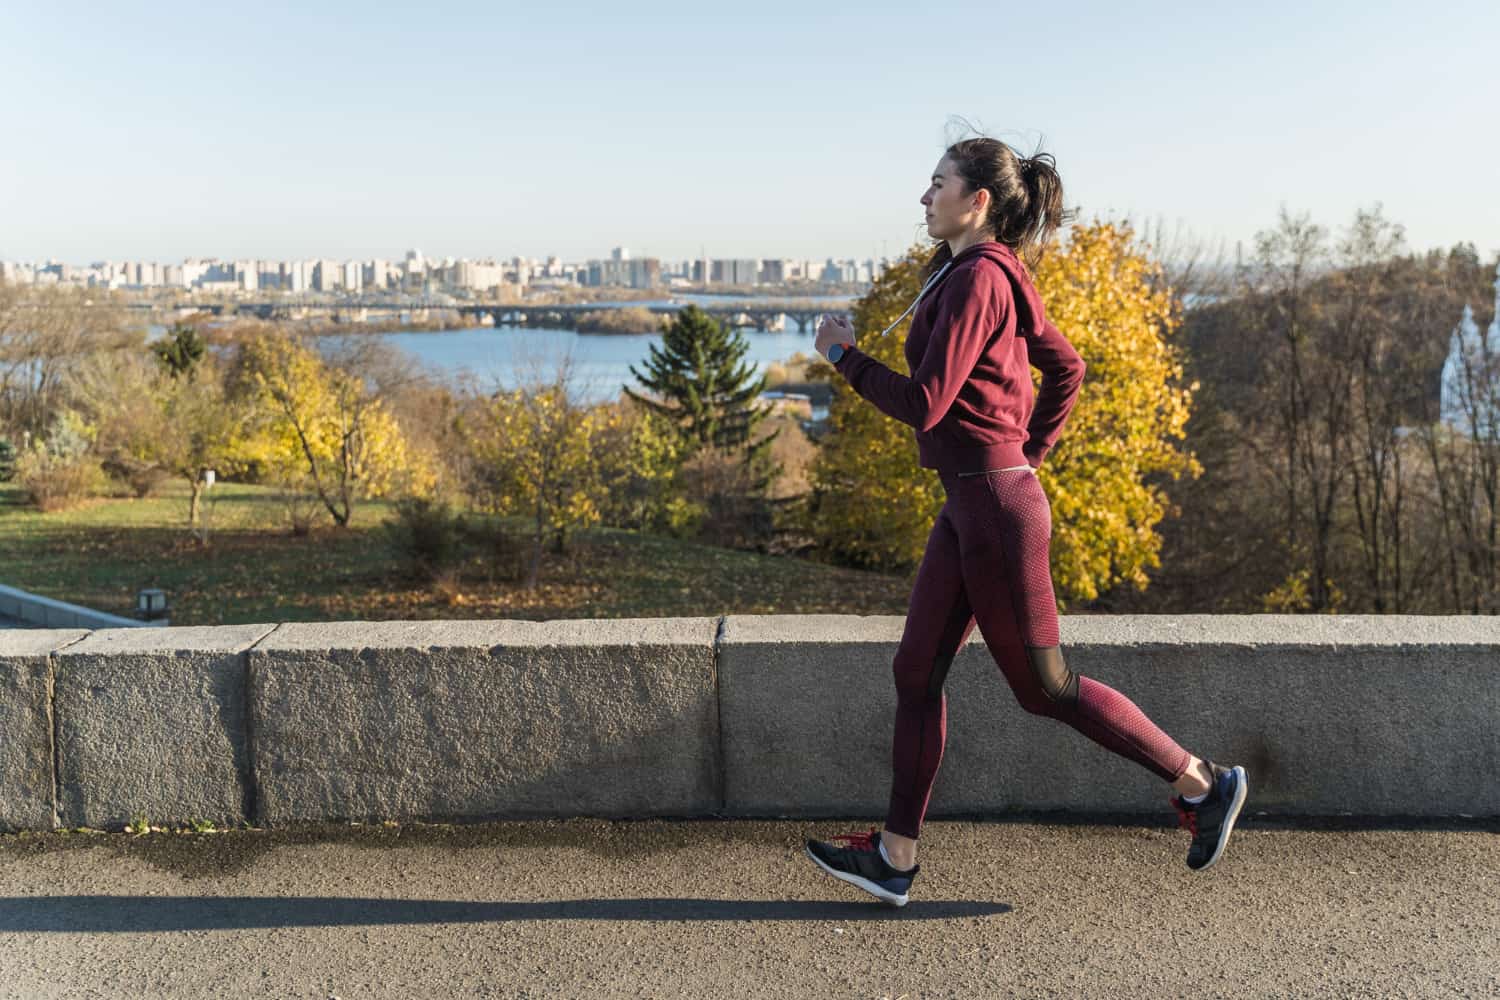 Running May Help Relieve Depression